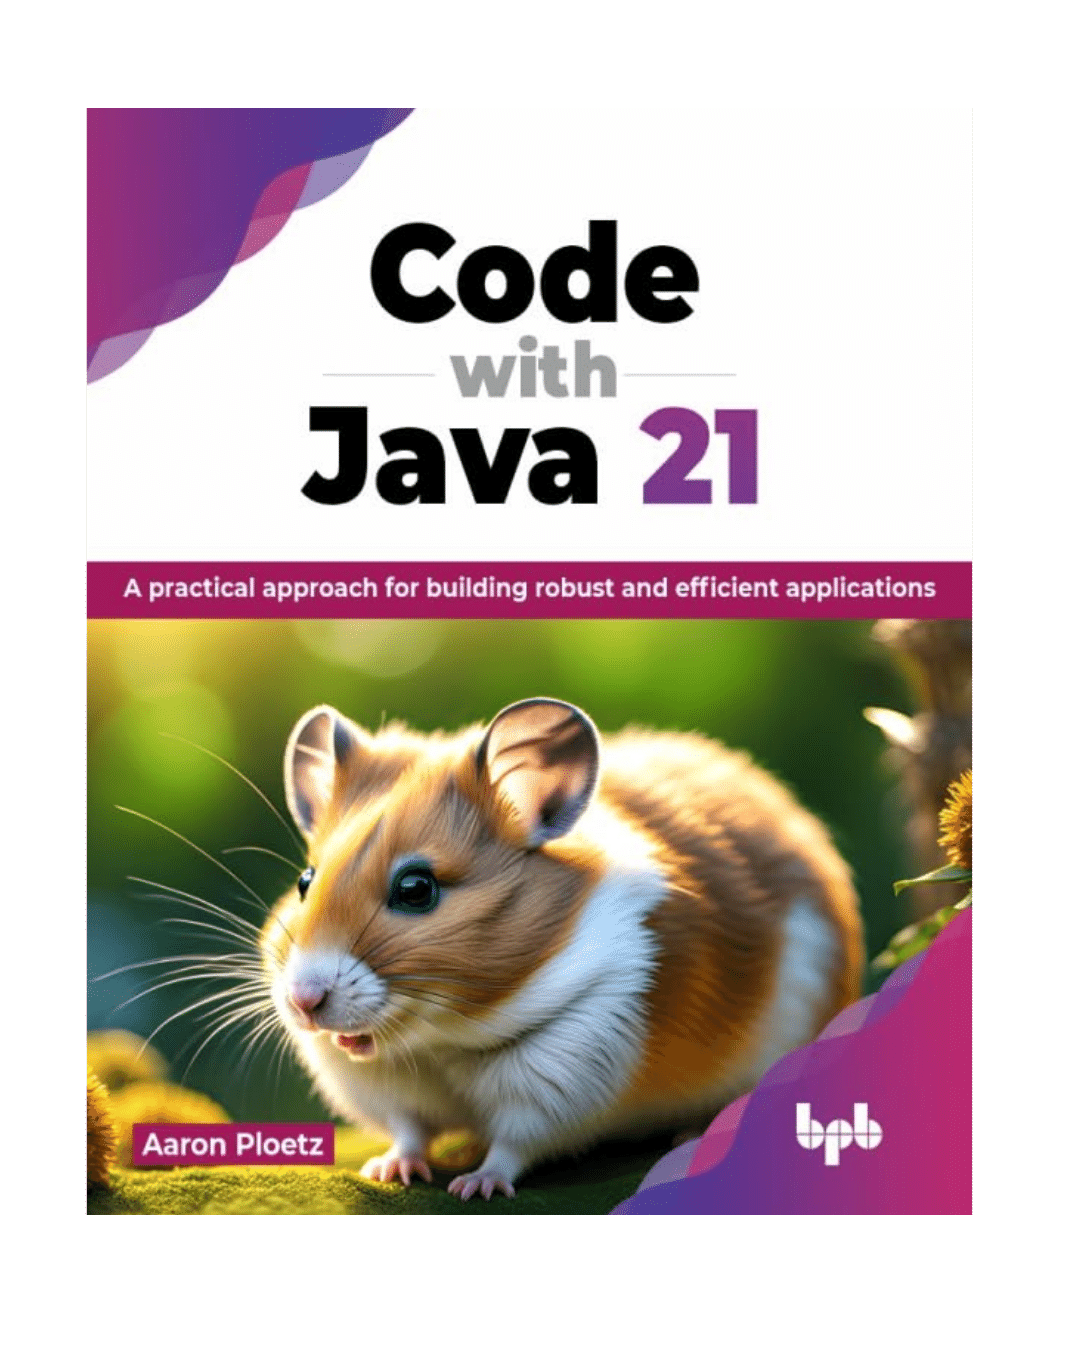 Code with Java 21- A practical approach for building robust and efficient applications